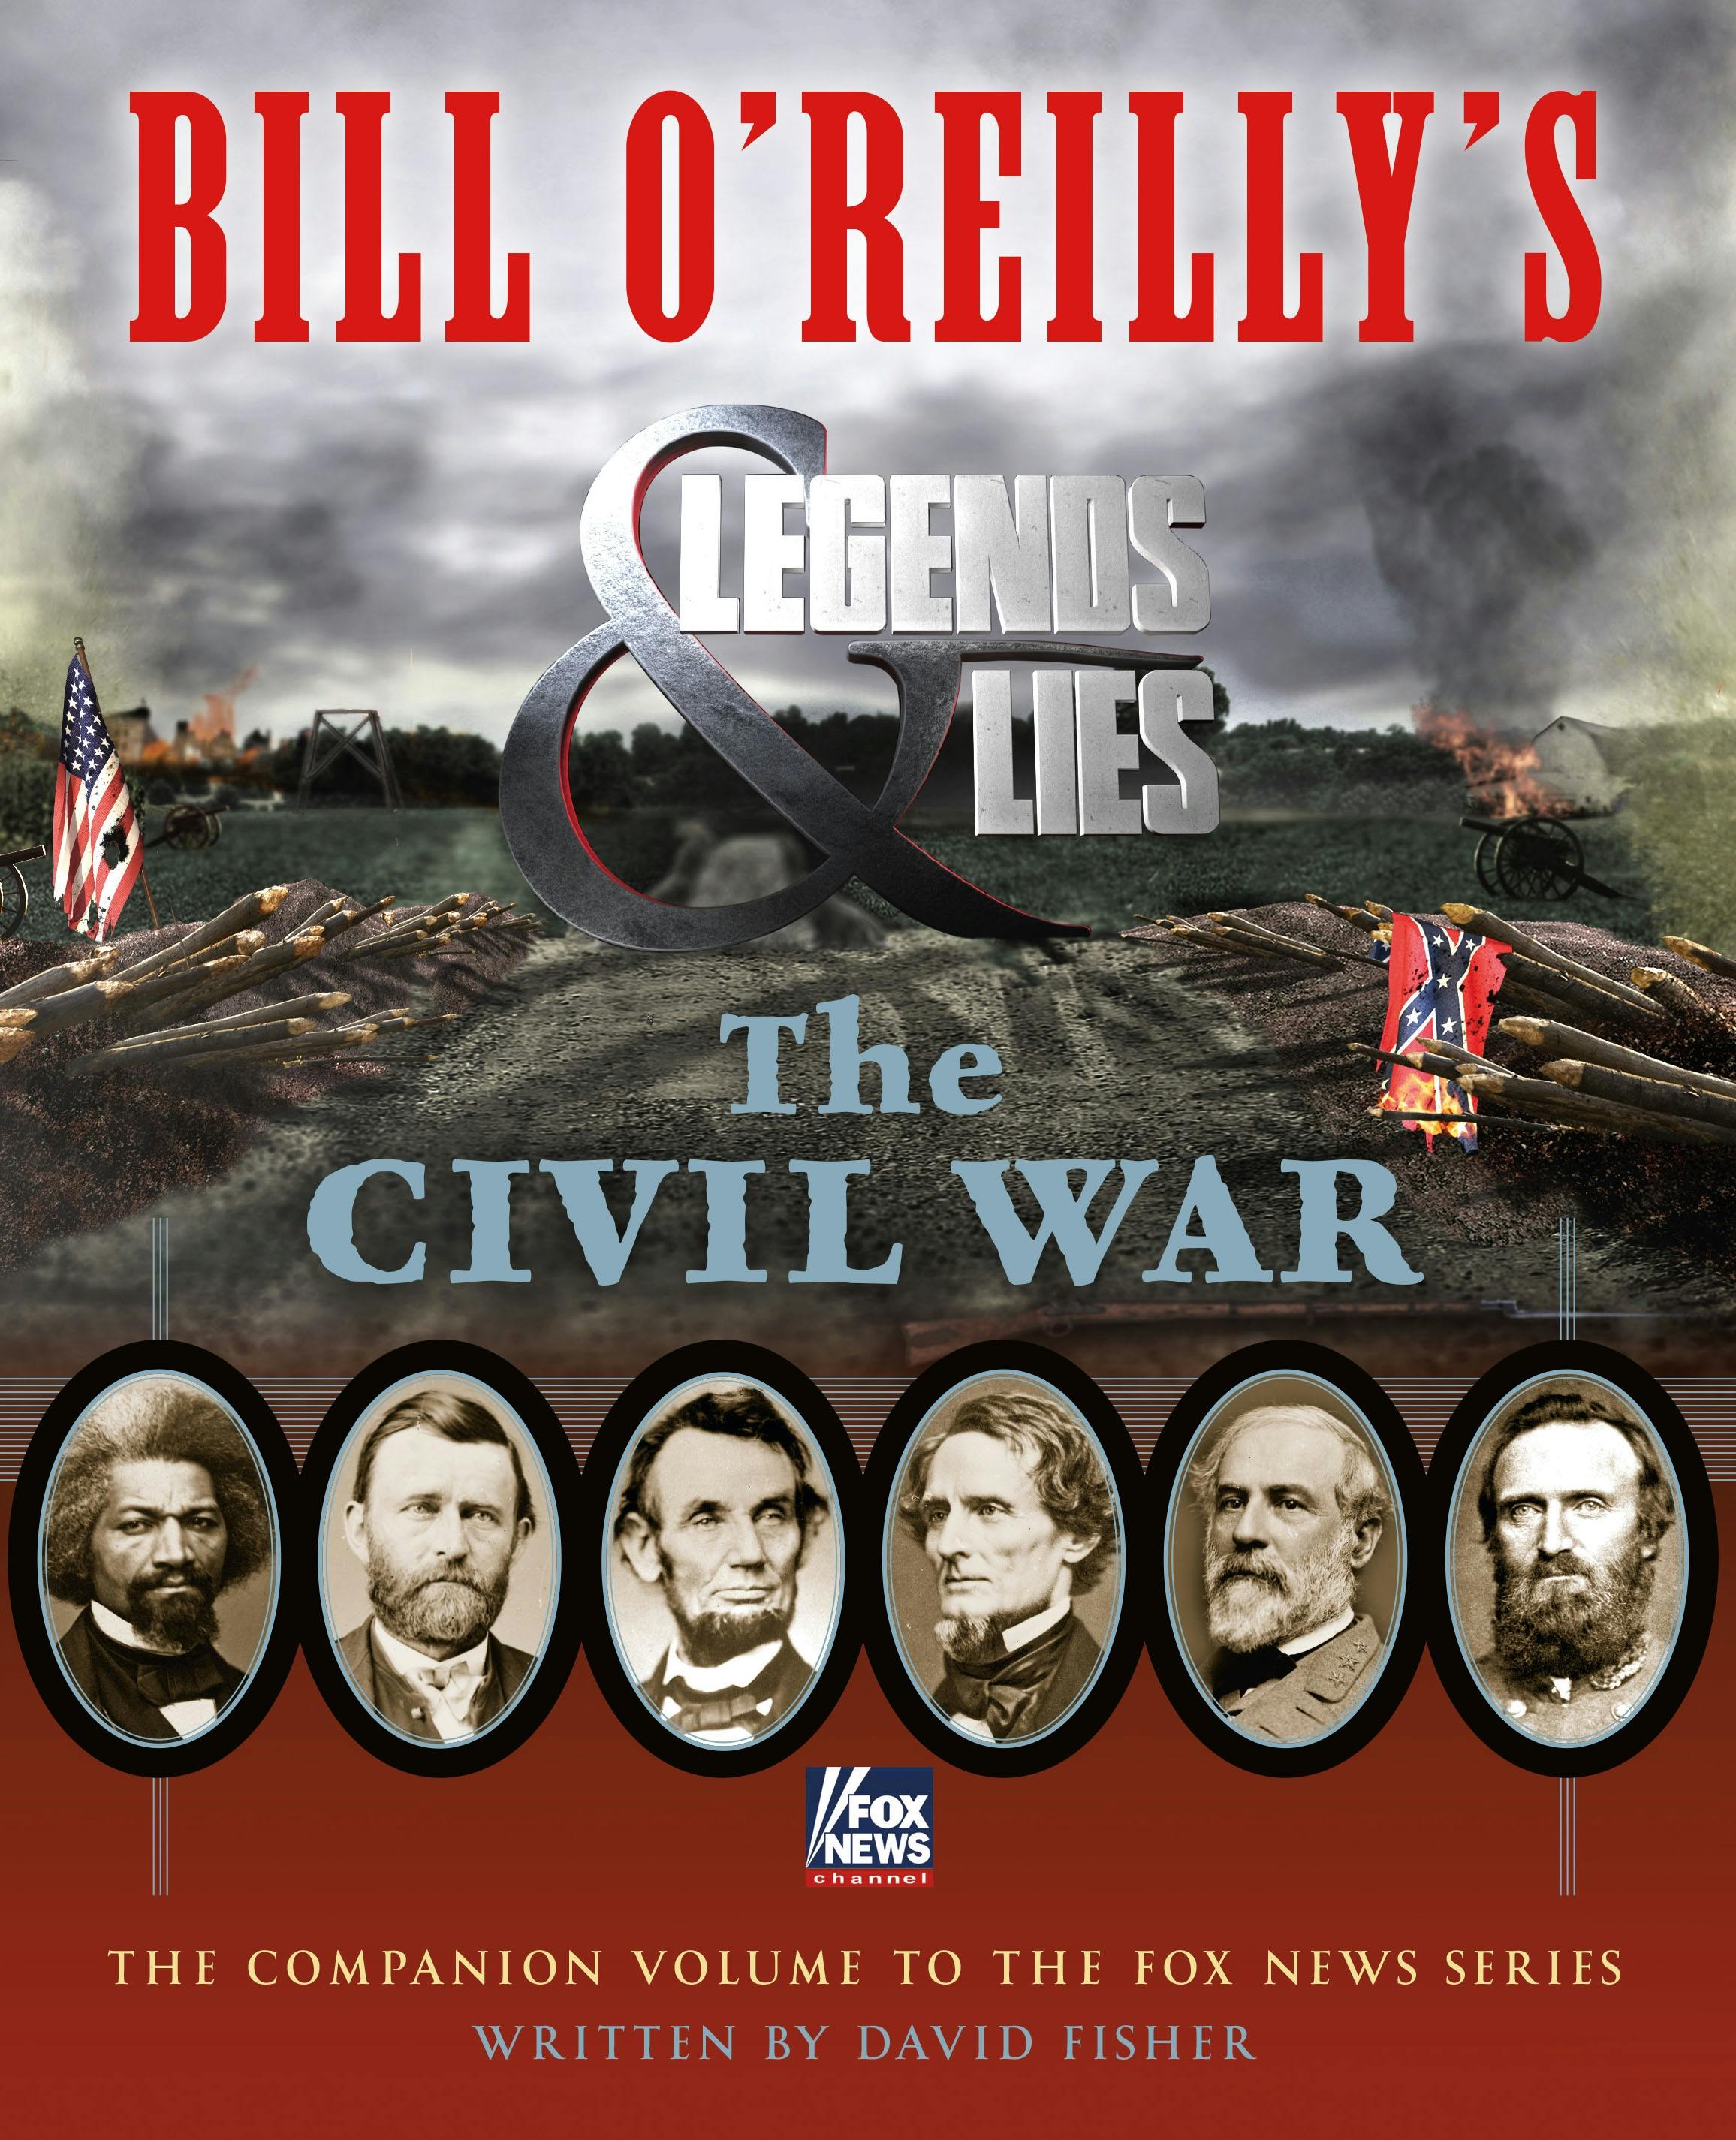 Image of Bill O'Reilly's Legends and Lies: The Civil War